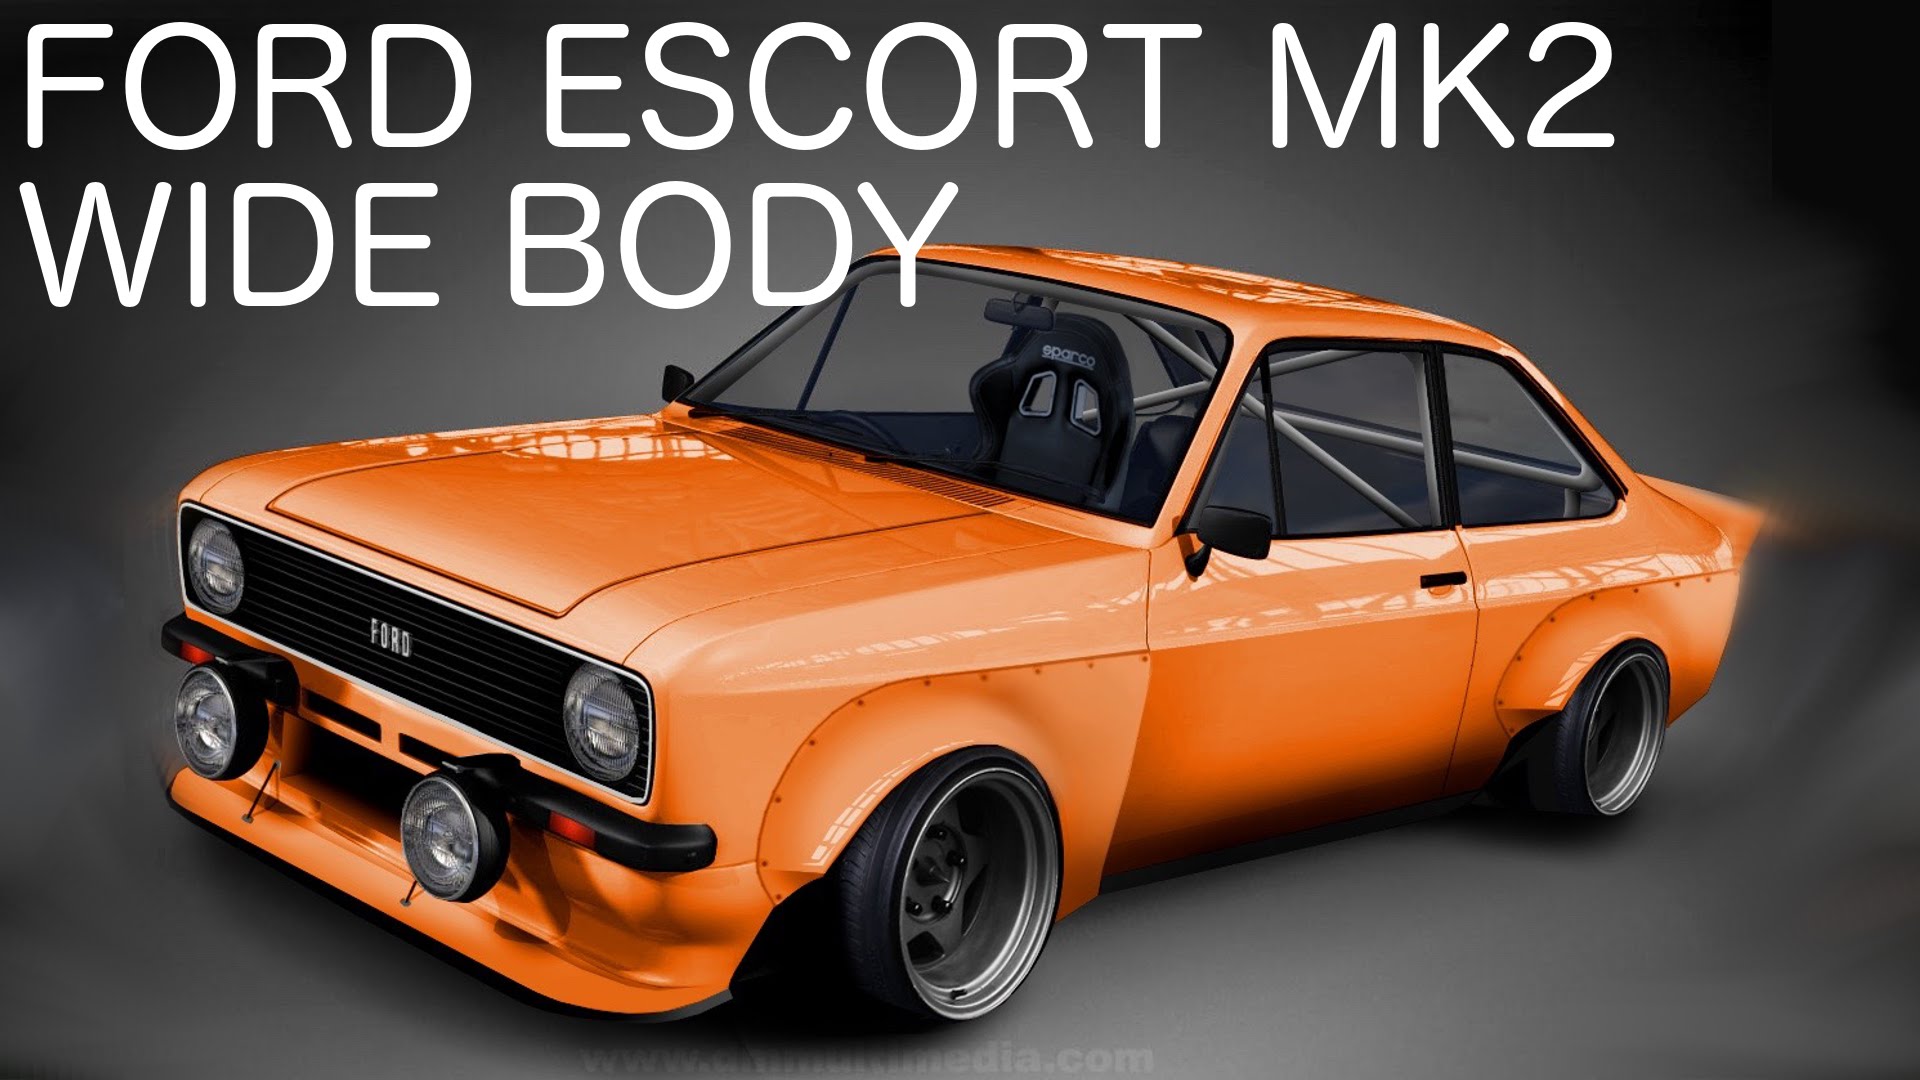 Amazing Ford Escort Mk2 Pictures & Backgrounds